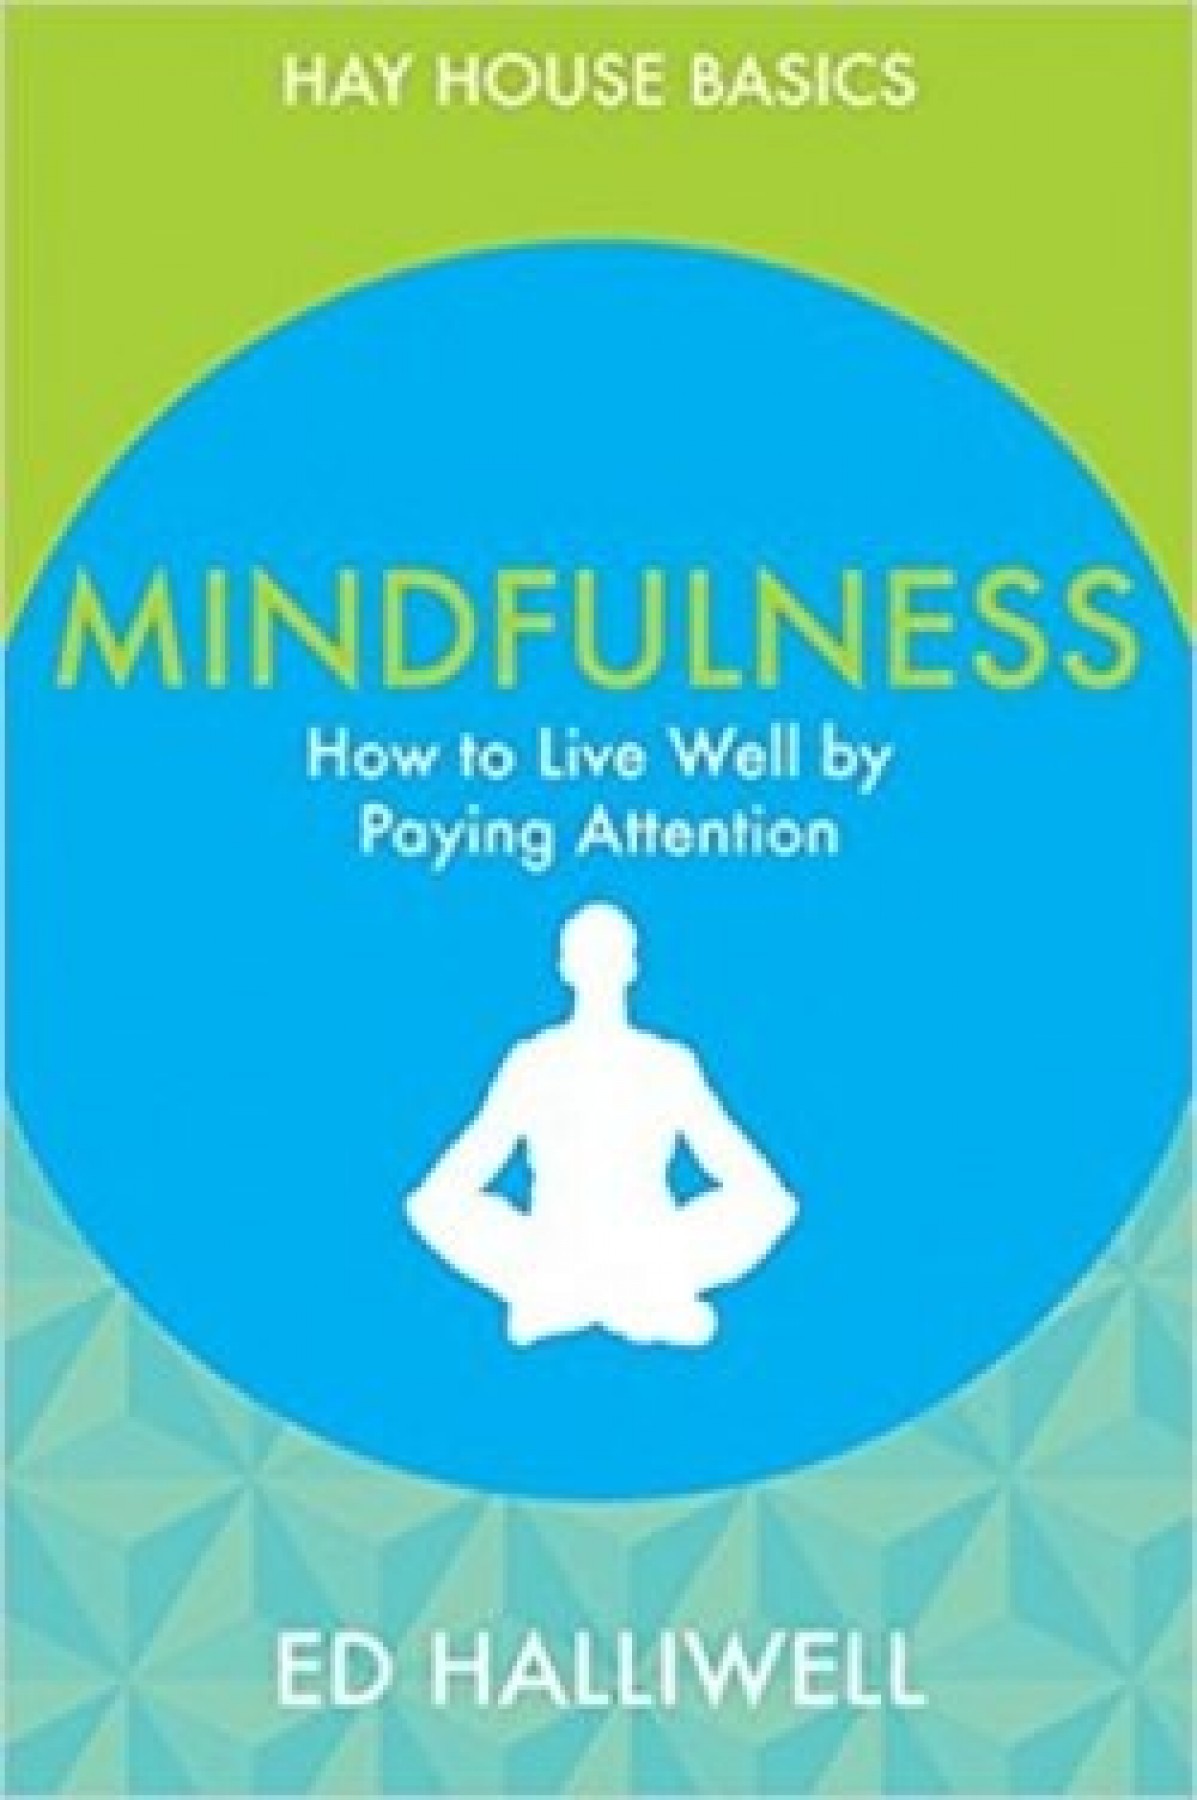 Mindfulness: How to live well by paying attention